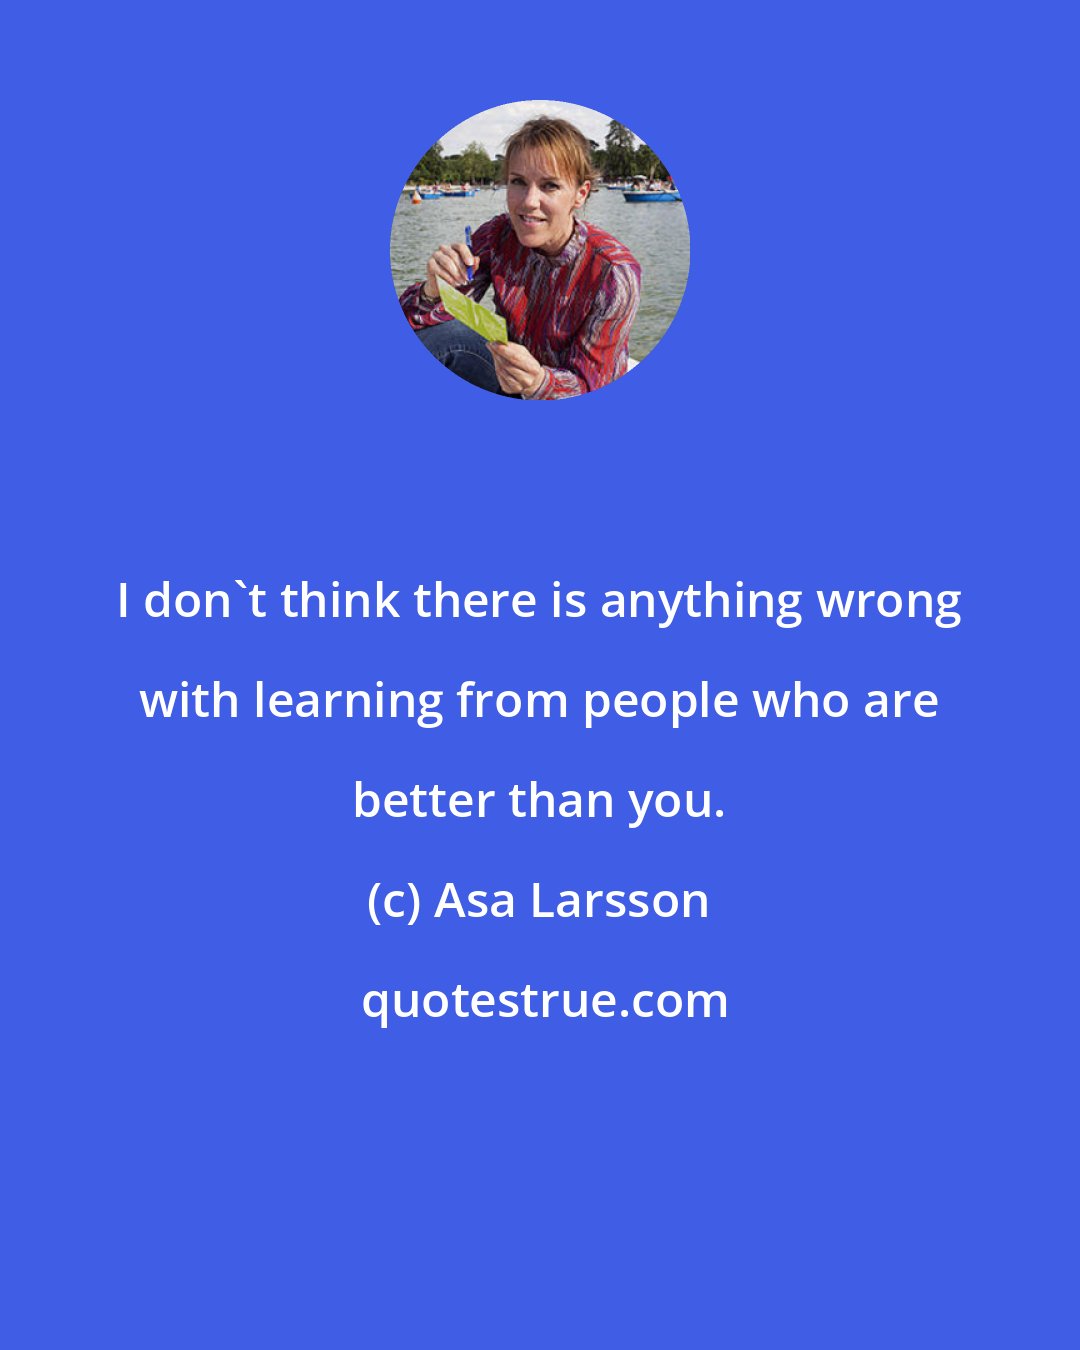 Asa Larsson: I don't think there is anything wrong with learning from people who are better than you.